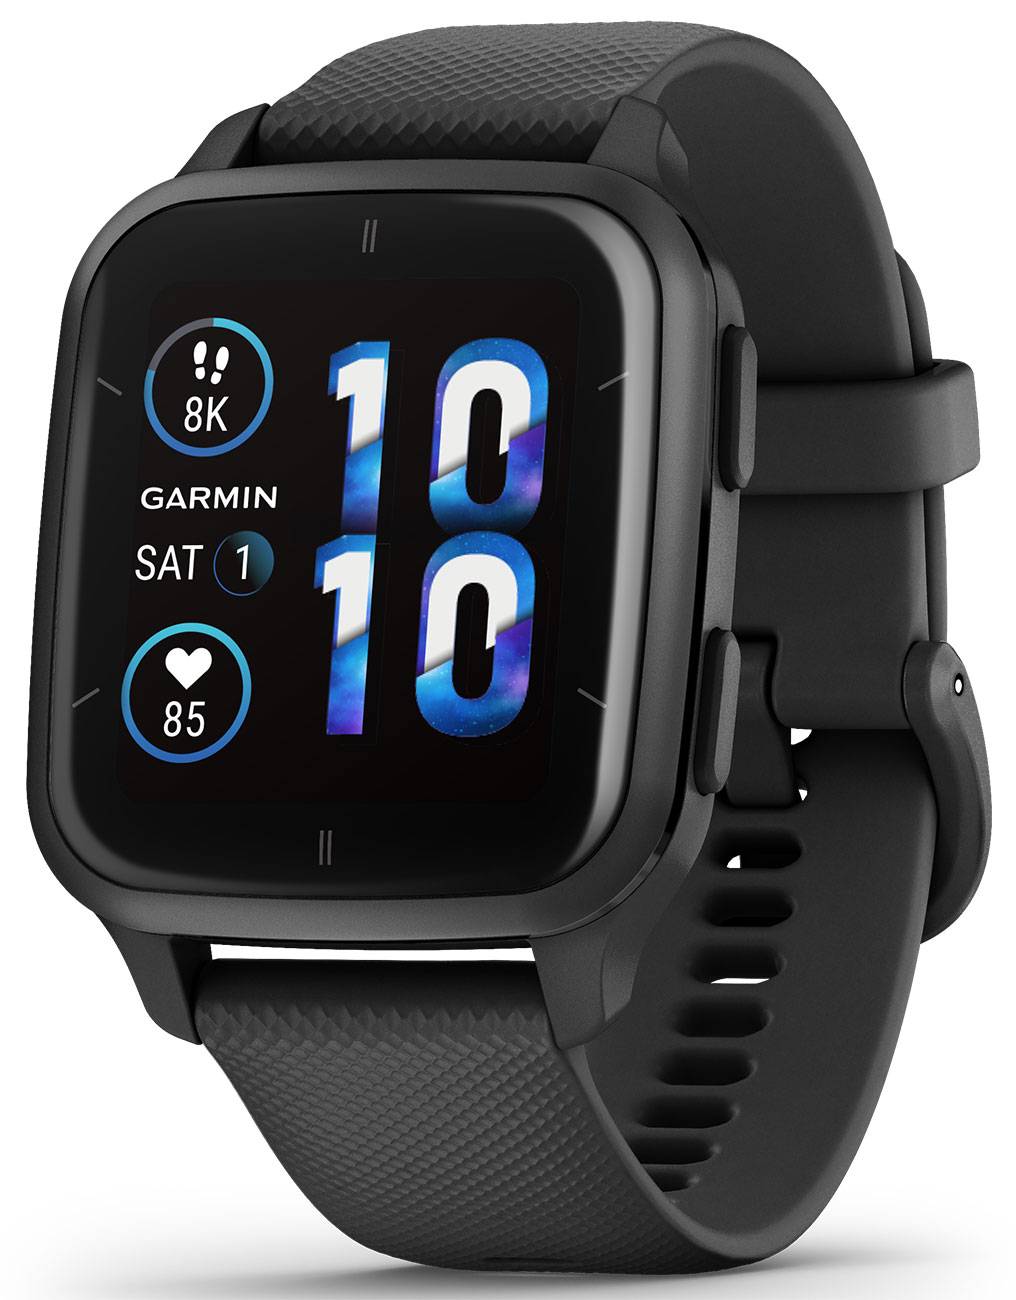 Garmin Venu Sq 2 GPS Smartwatch in Metallic Mint Aluminum Bezel with Cool  Mint Case and Silicone Band